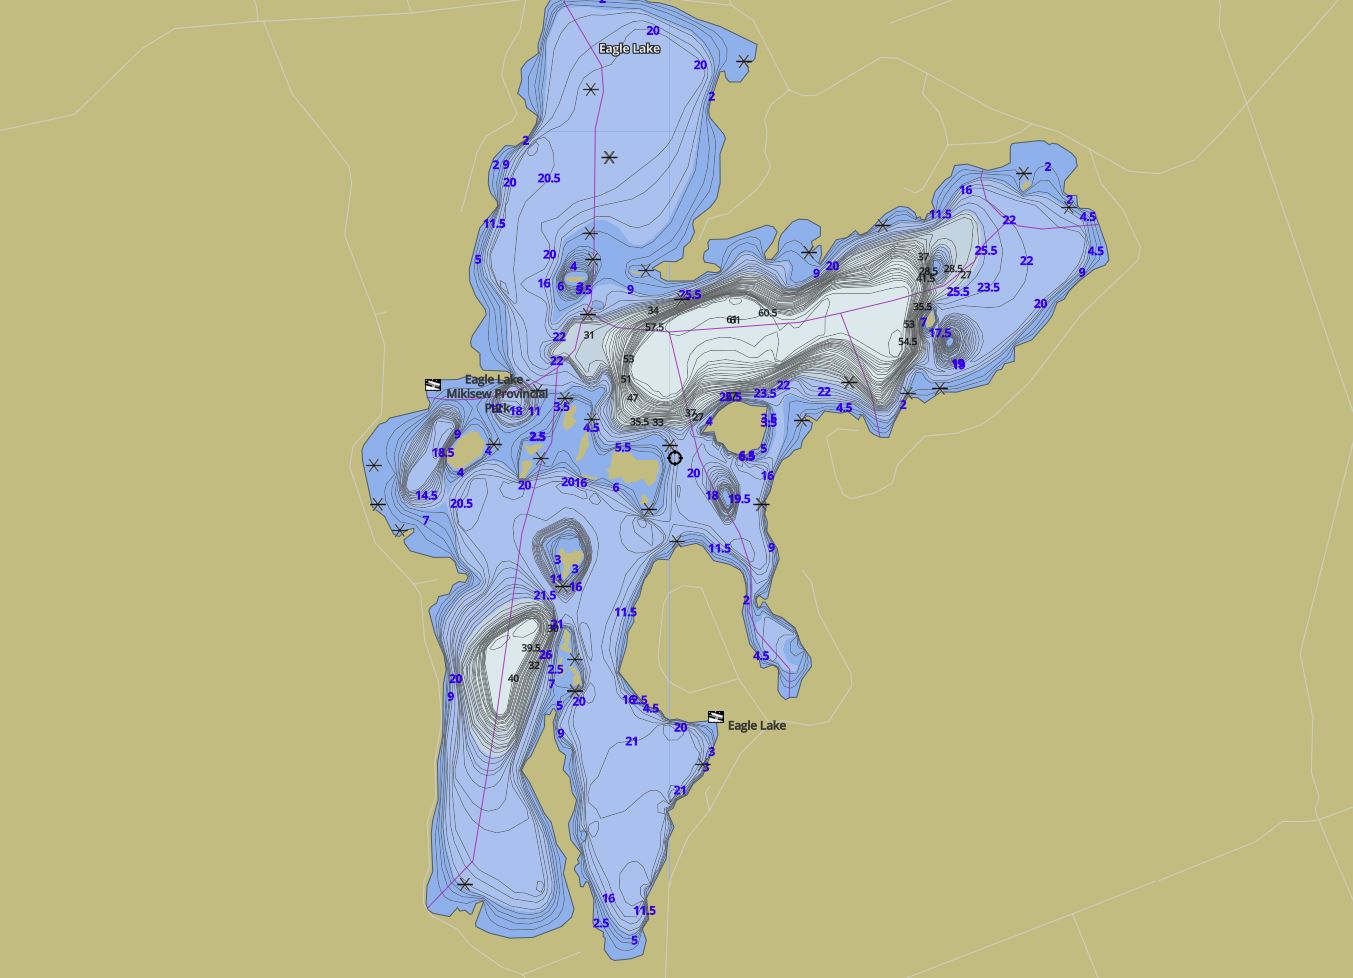 Contour Map of Eagle Lake in Municipality of Machar and the District of Parry Sound